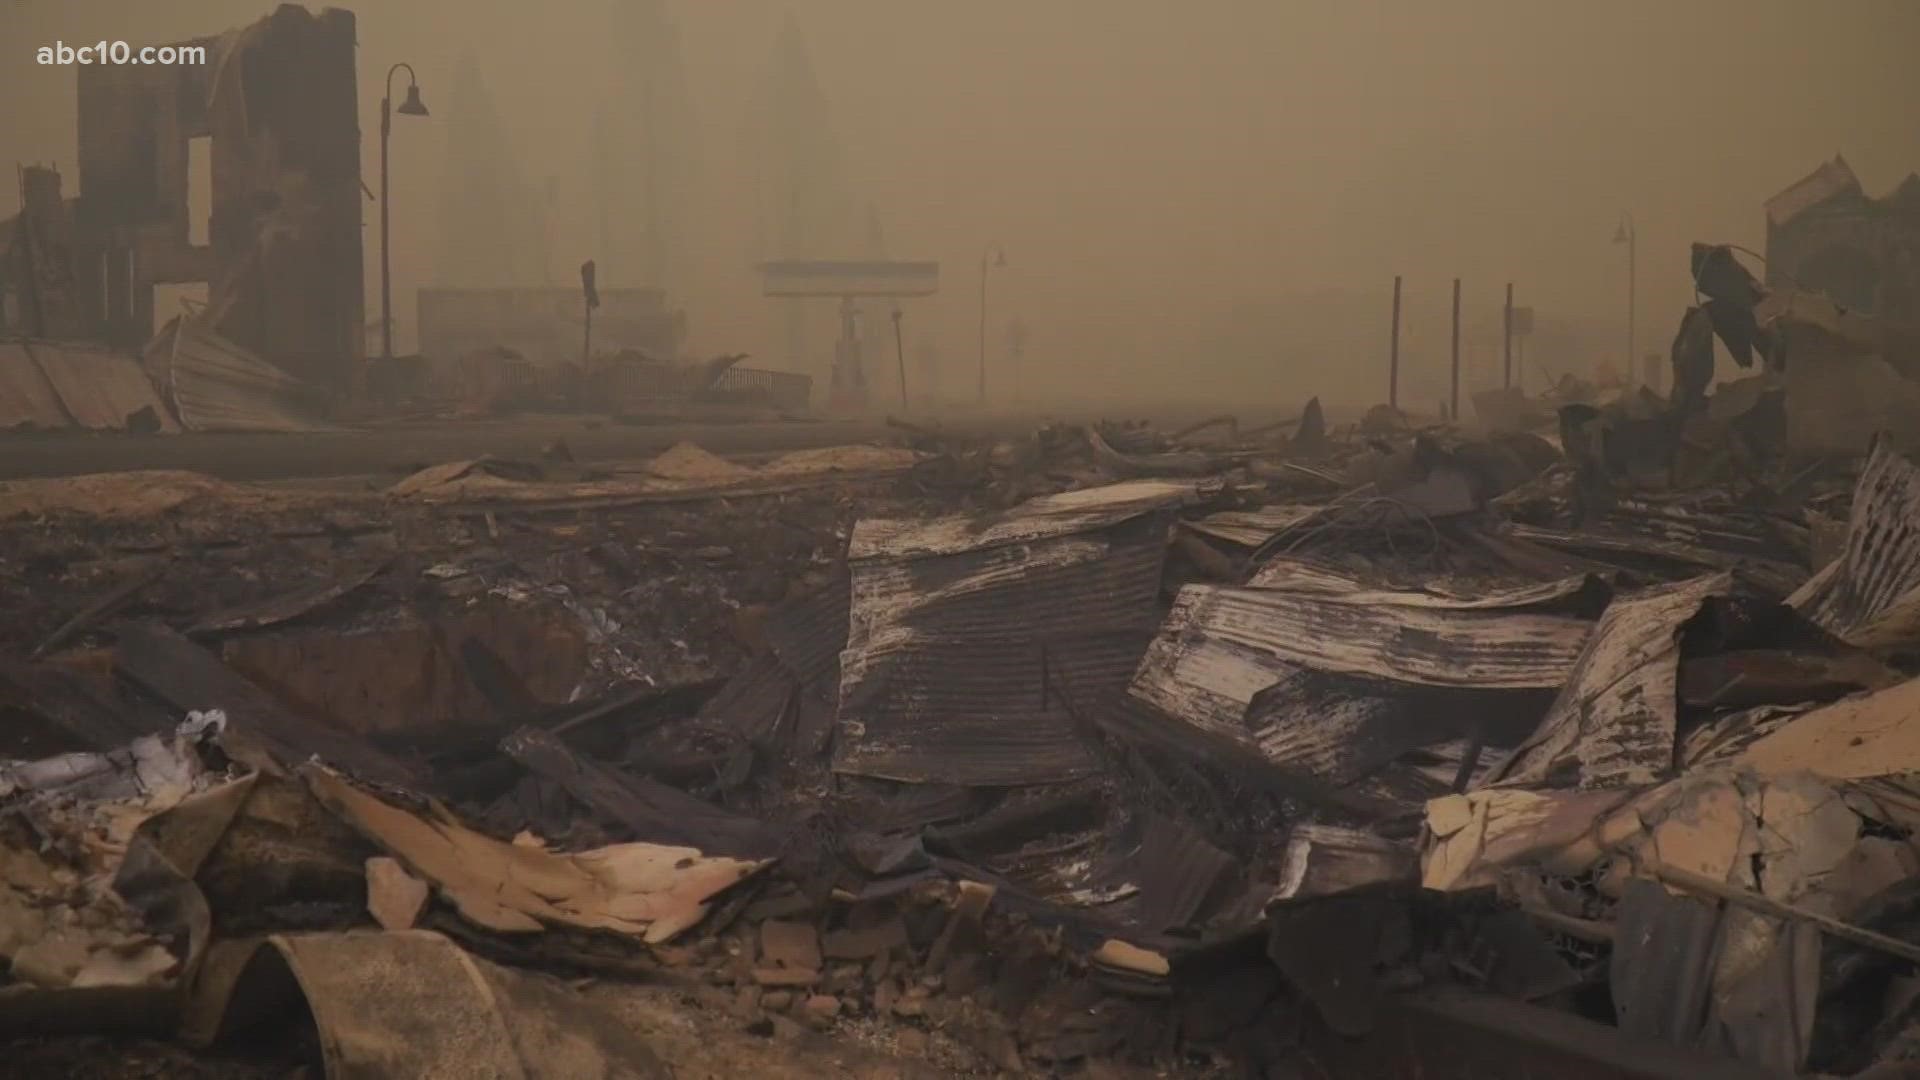 While firefighters try to save as many homes and structures as possible, residents in the area are thankful but also devastated.